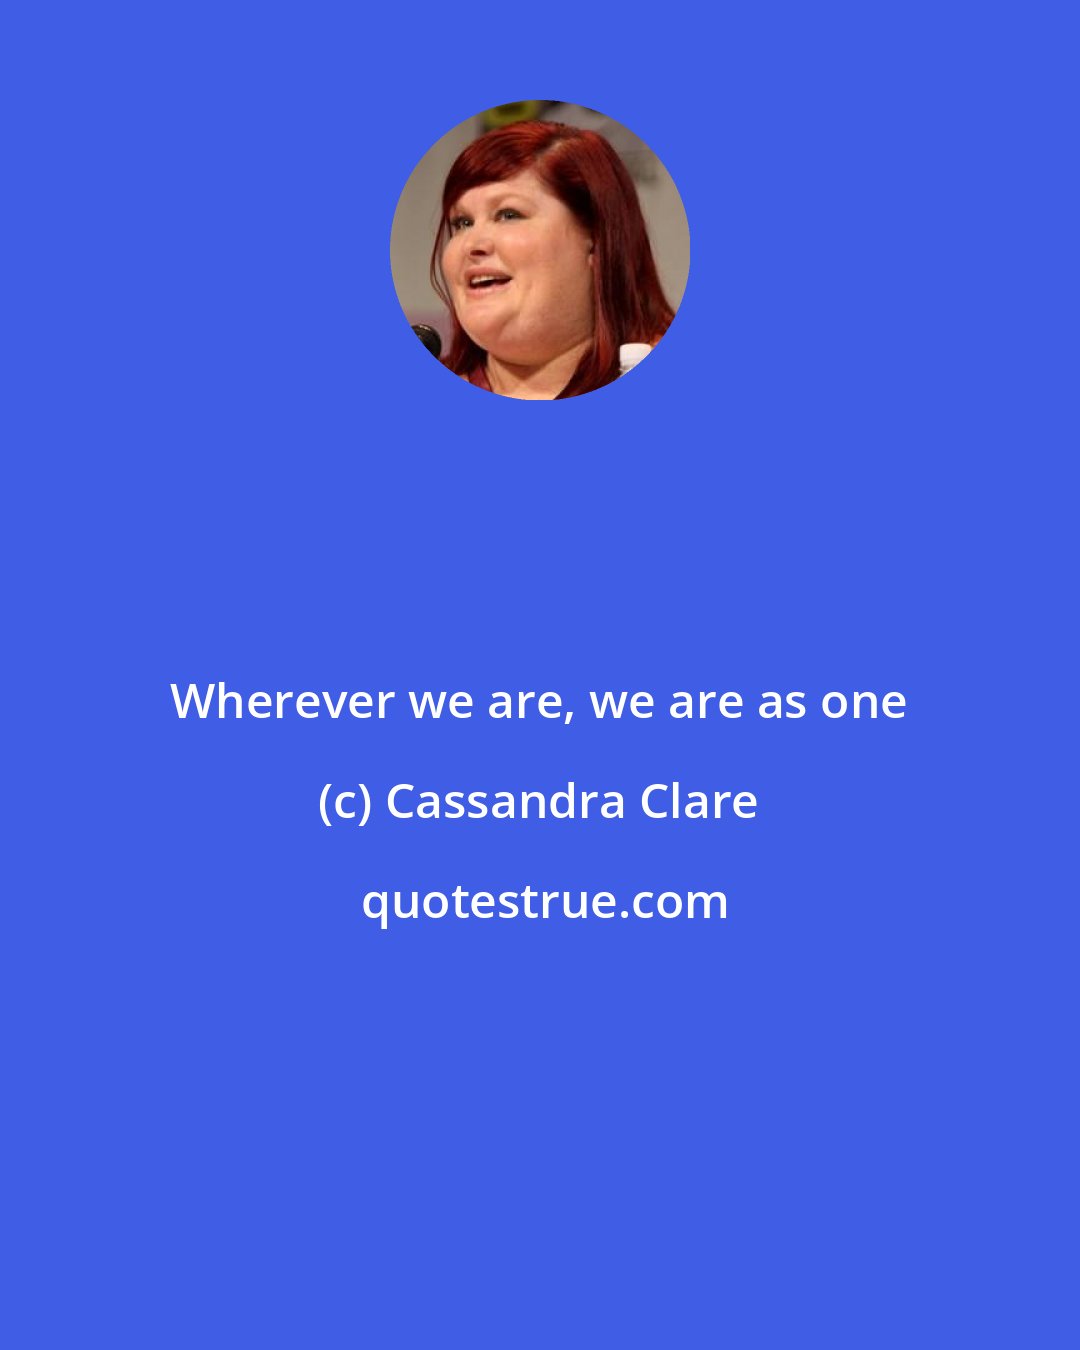 Cassandra Clare: Wherever we are, we are as one